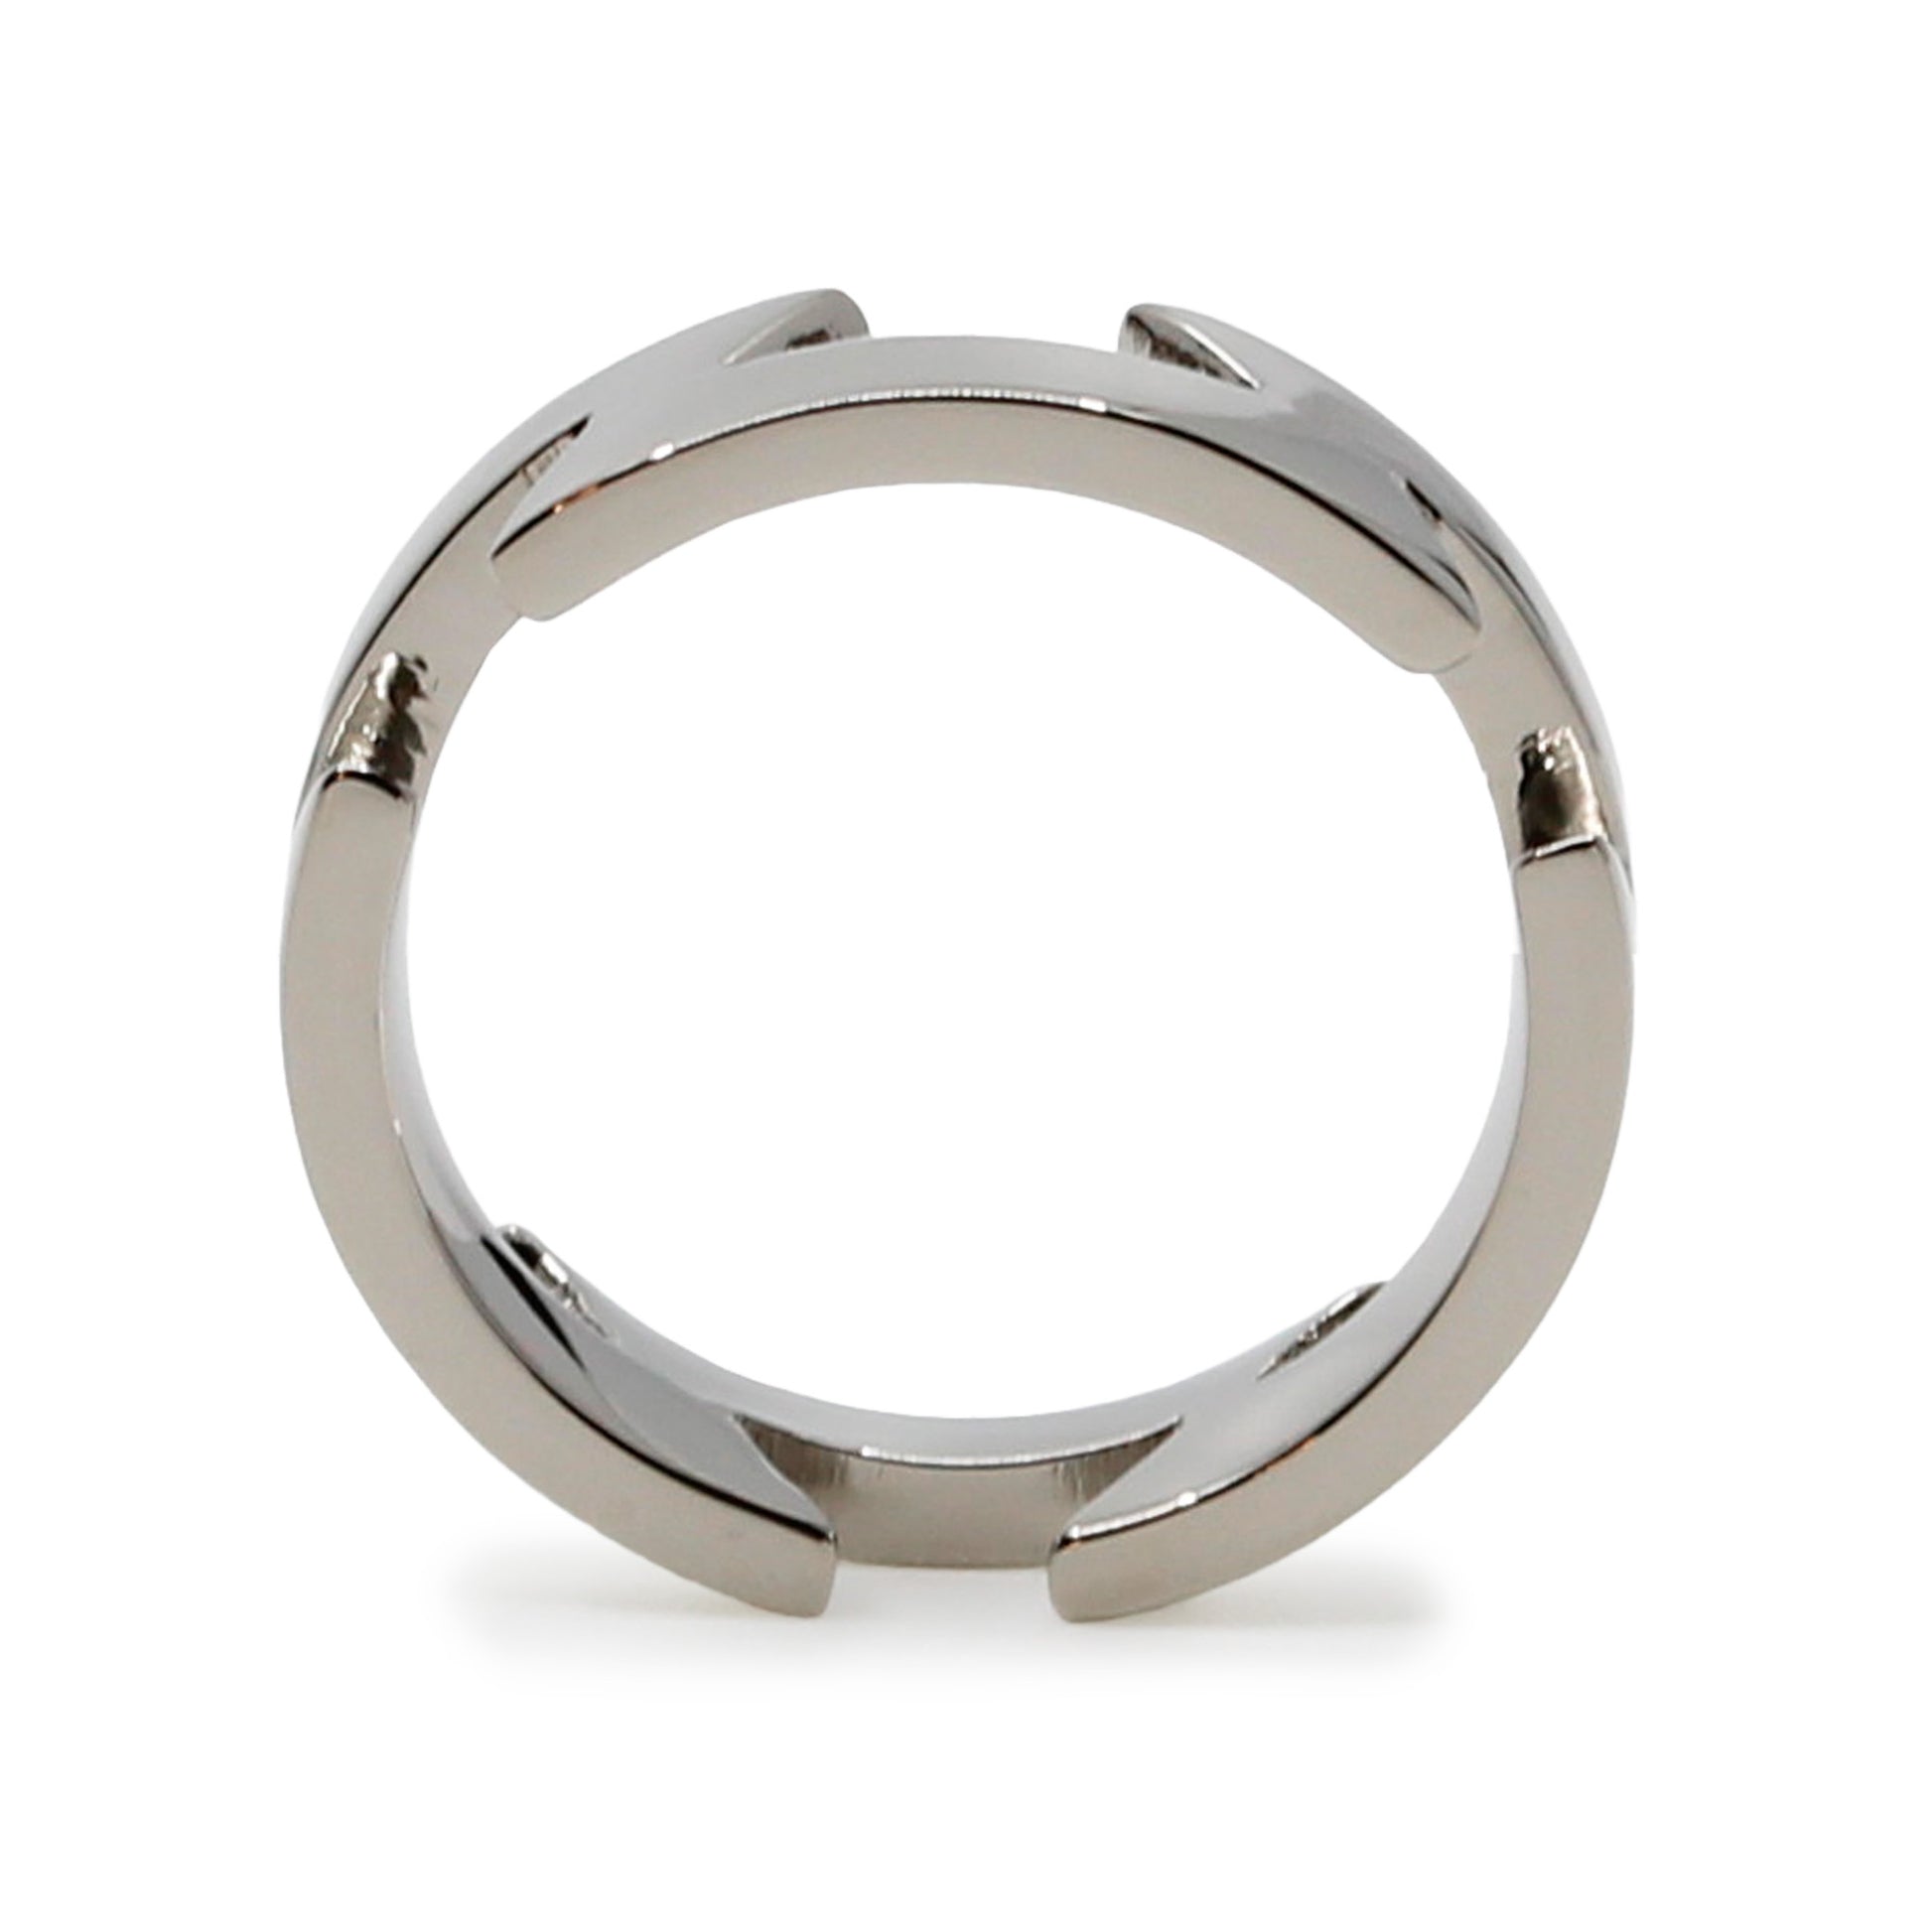 Single silver-colored titanium ring with zig-zag pattern, 6 mm thick. Image shows front view of the ring while it standing balancing on its side.